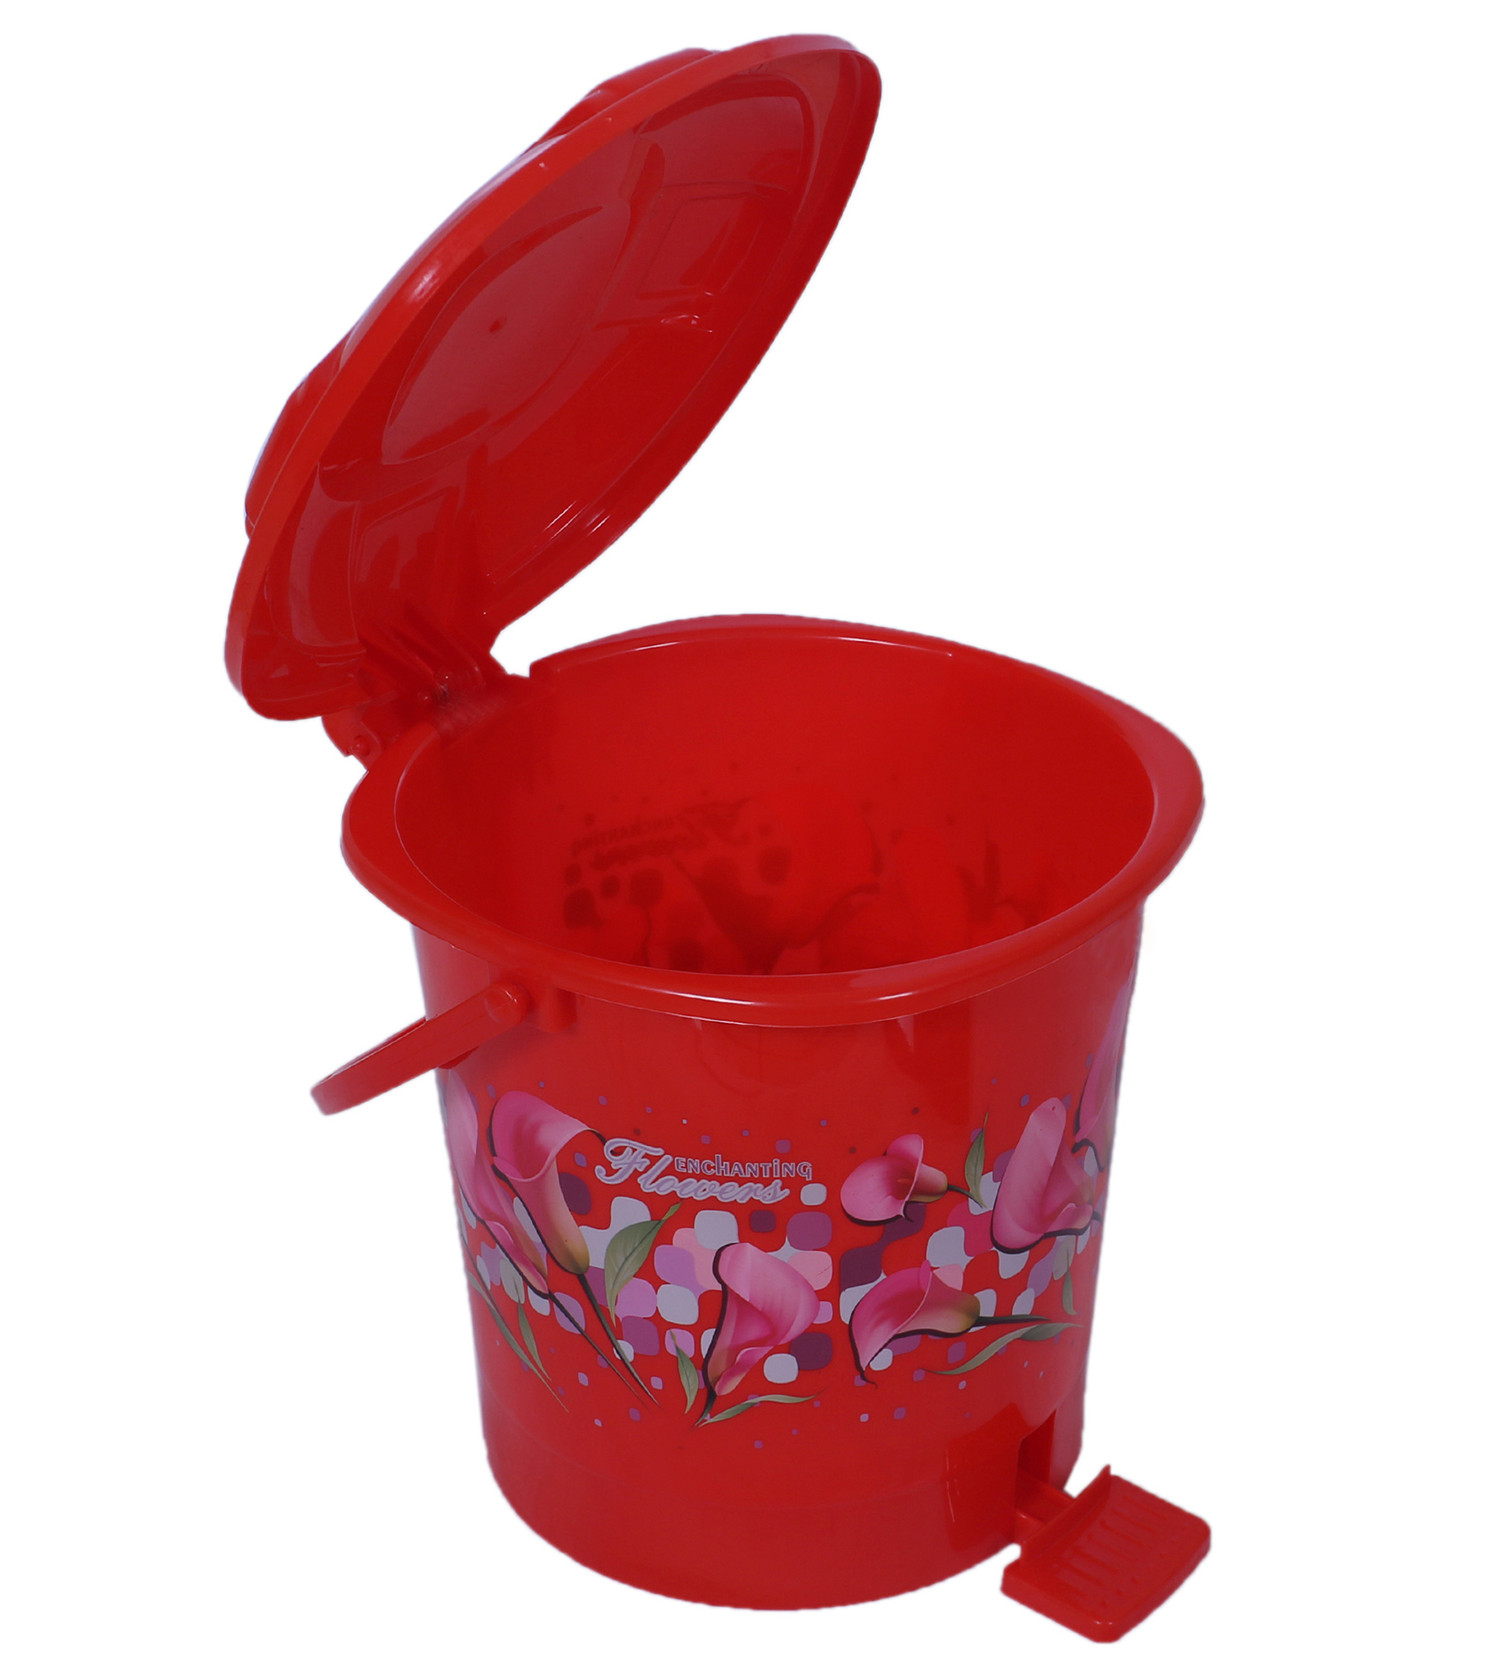 Kuber Industries Durable Flower Print Plastic Pedal Dustbin|Waste Bin|Trash Can For Kitchen & Home With Handle,7 Litre (Red)